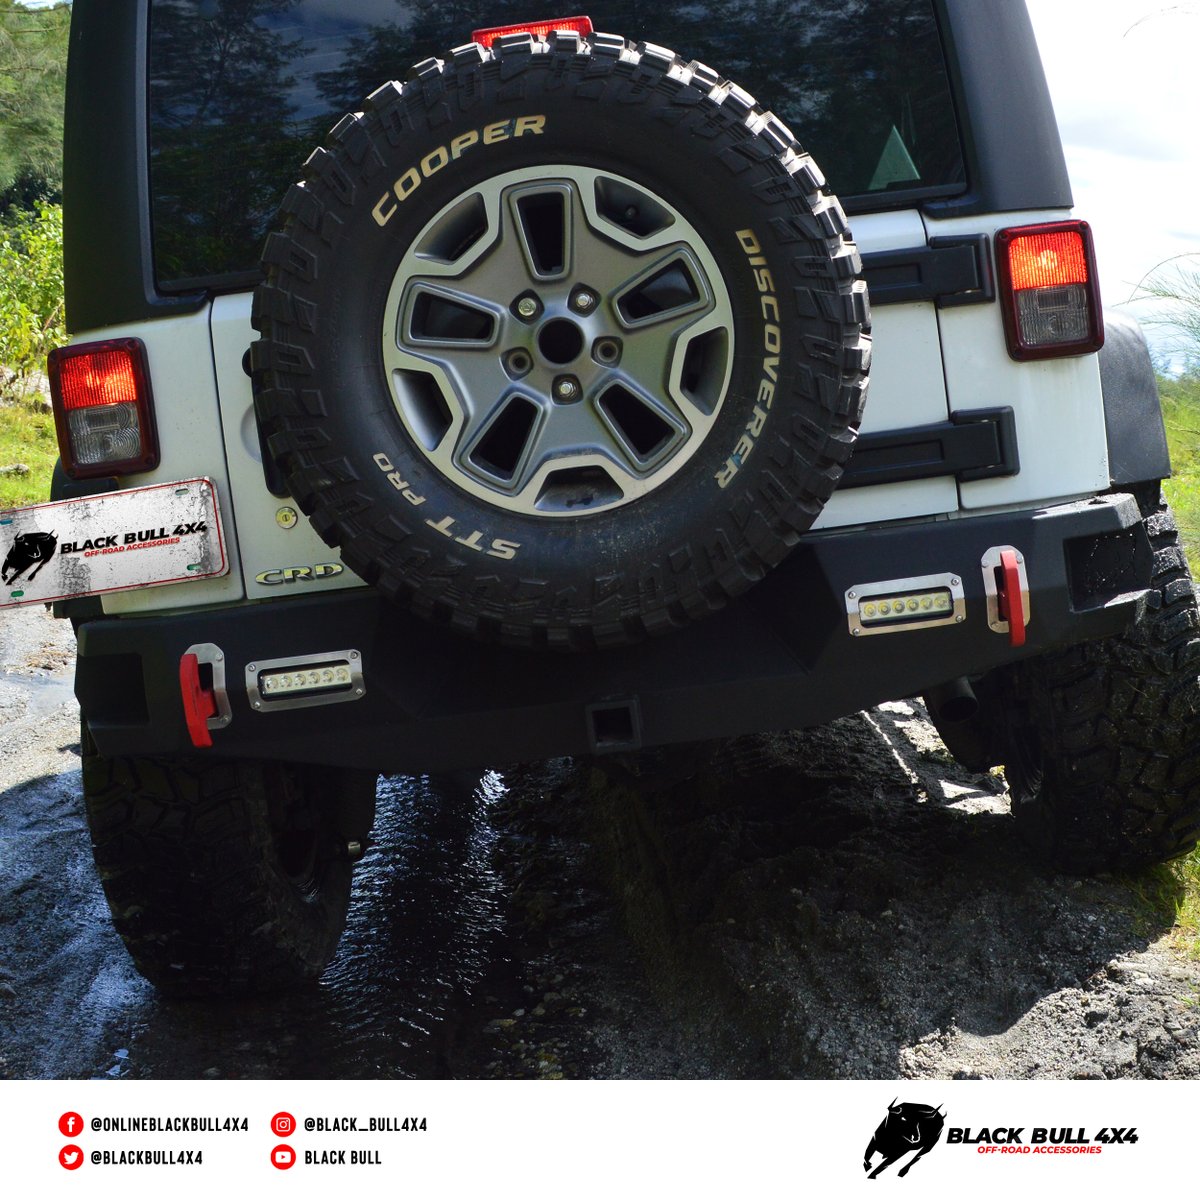 #BlackBull4x4 Rear Bumper is easy to install,
NO DRILLING required and ALL bolt-on installation! 
Get yours now! 
#BlackBull4x4 #RearBumper #OffRoadAccessory #4x4Jeep 